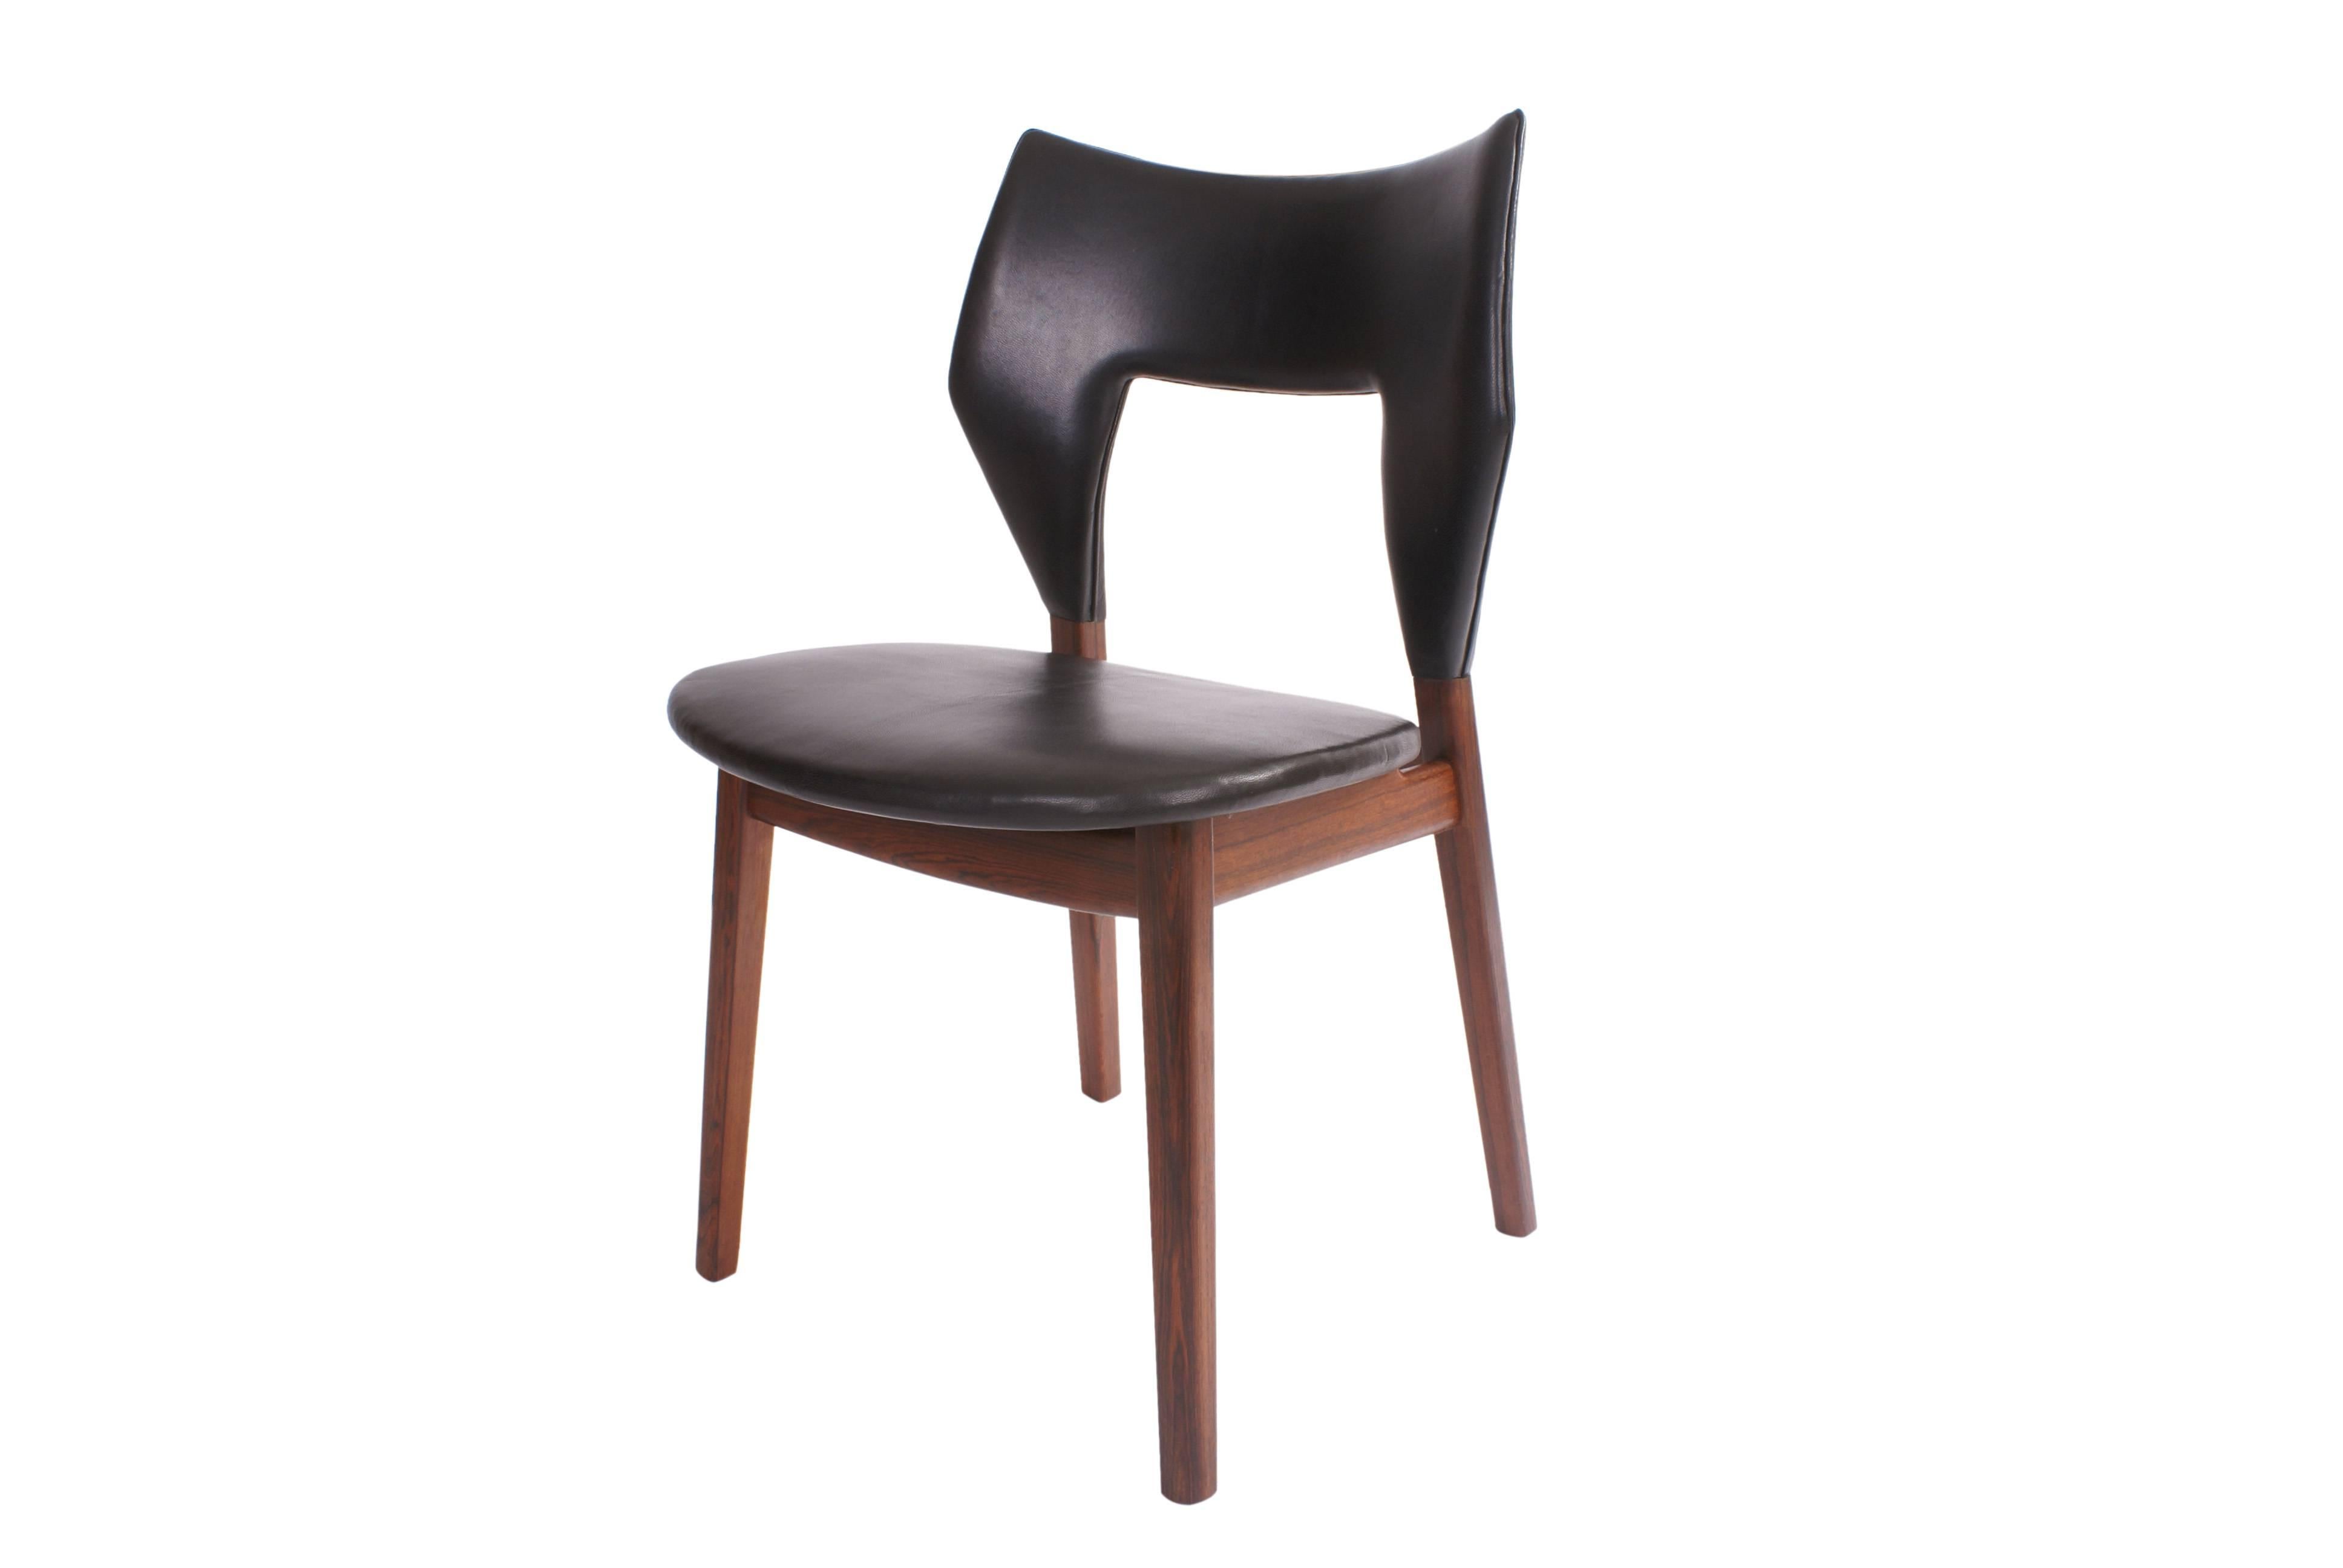 Mid-20th Century Tove & Edvard Kindt-Larsen Set of 12 Dining Chairs in Brazilian Rosewood For Sale